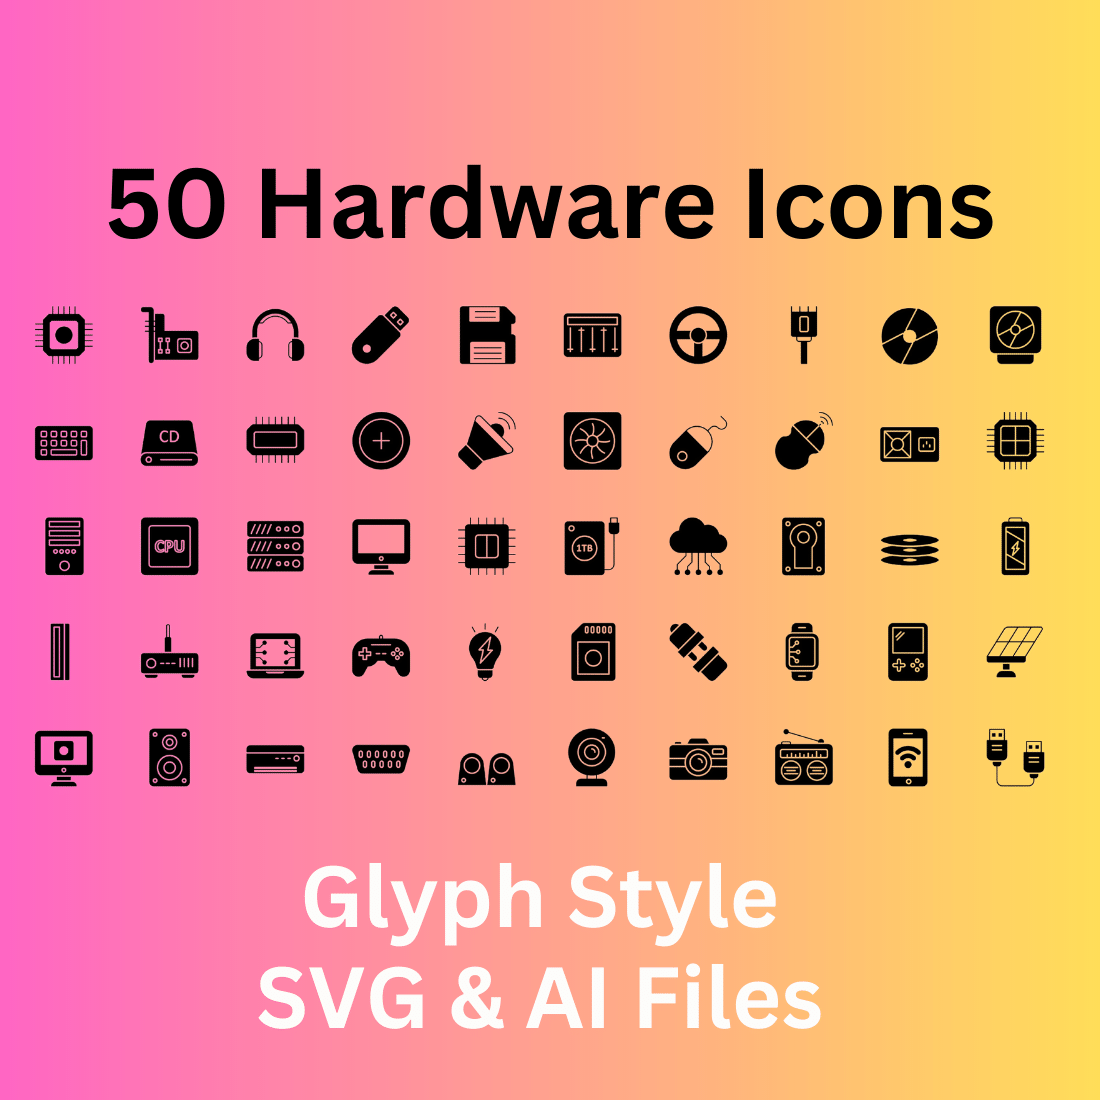 Hardware Set 50 Glyph Icons - SVG And AI Files cover image.